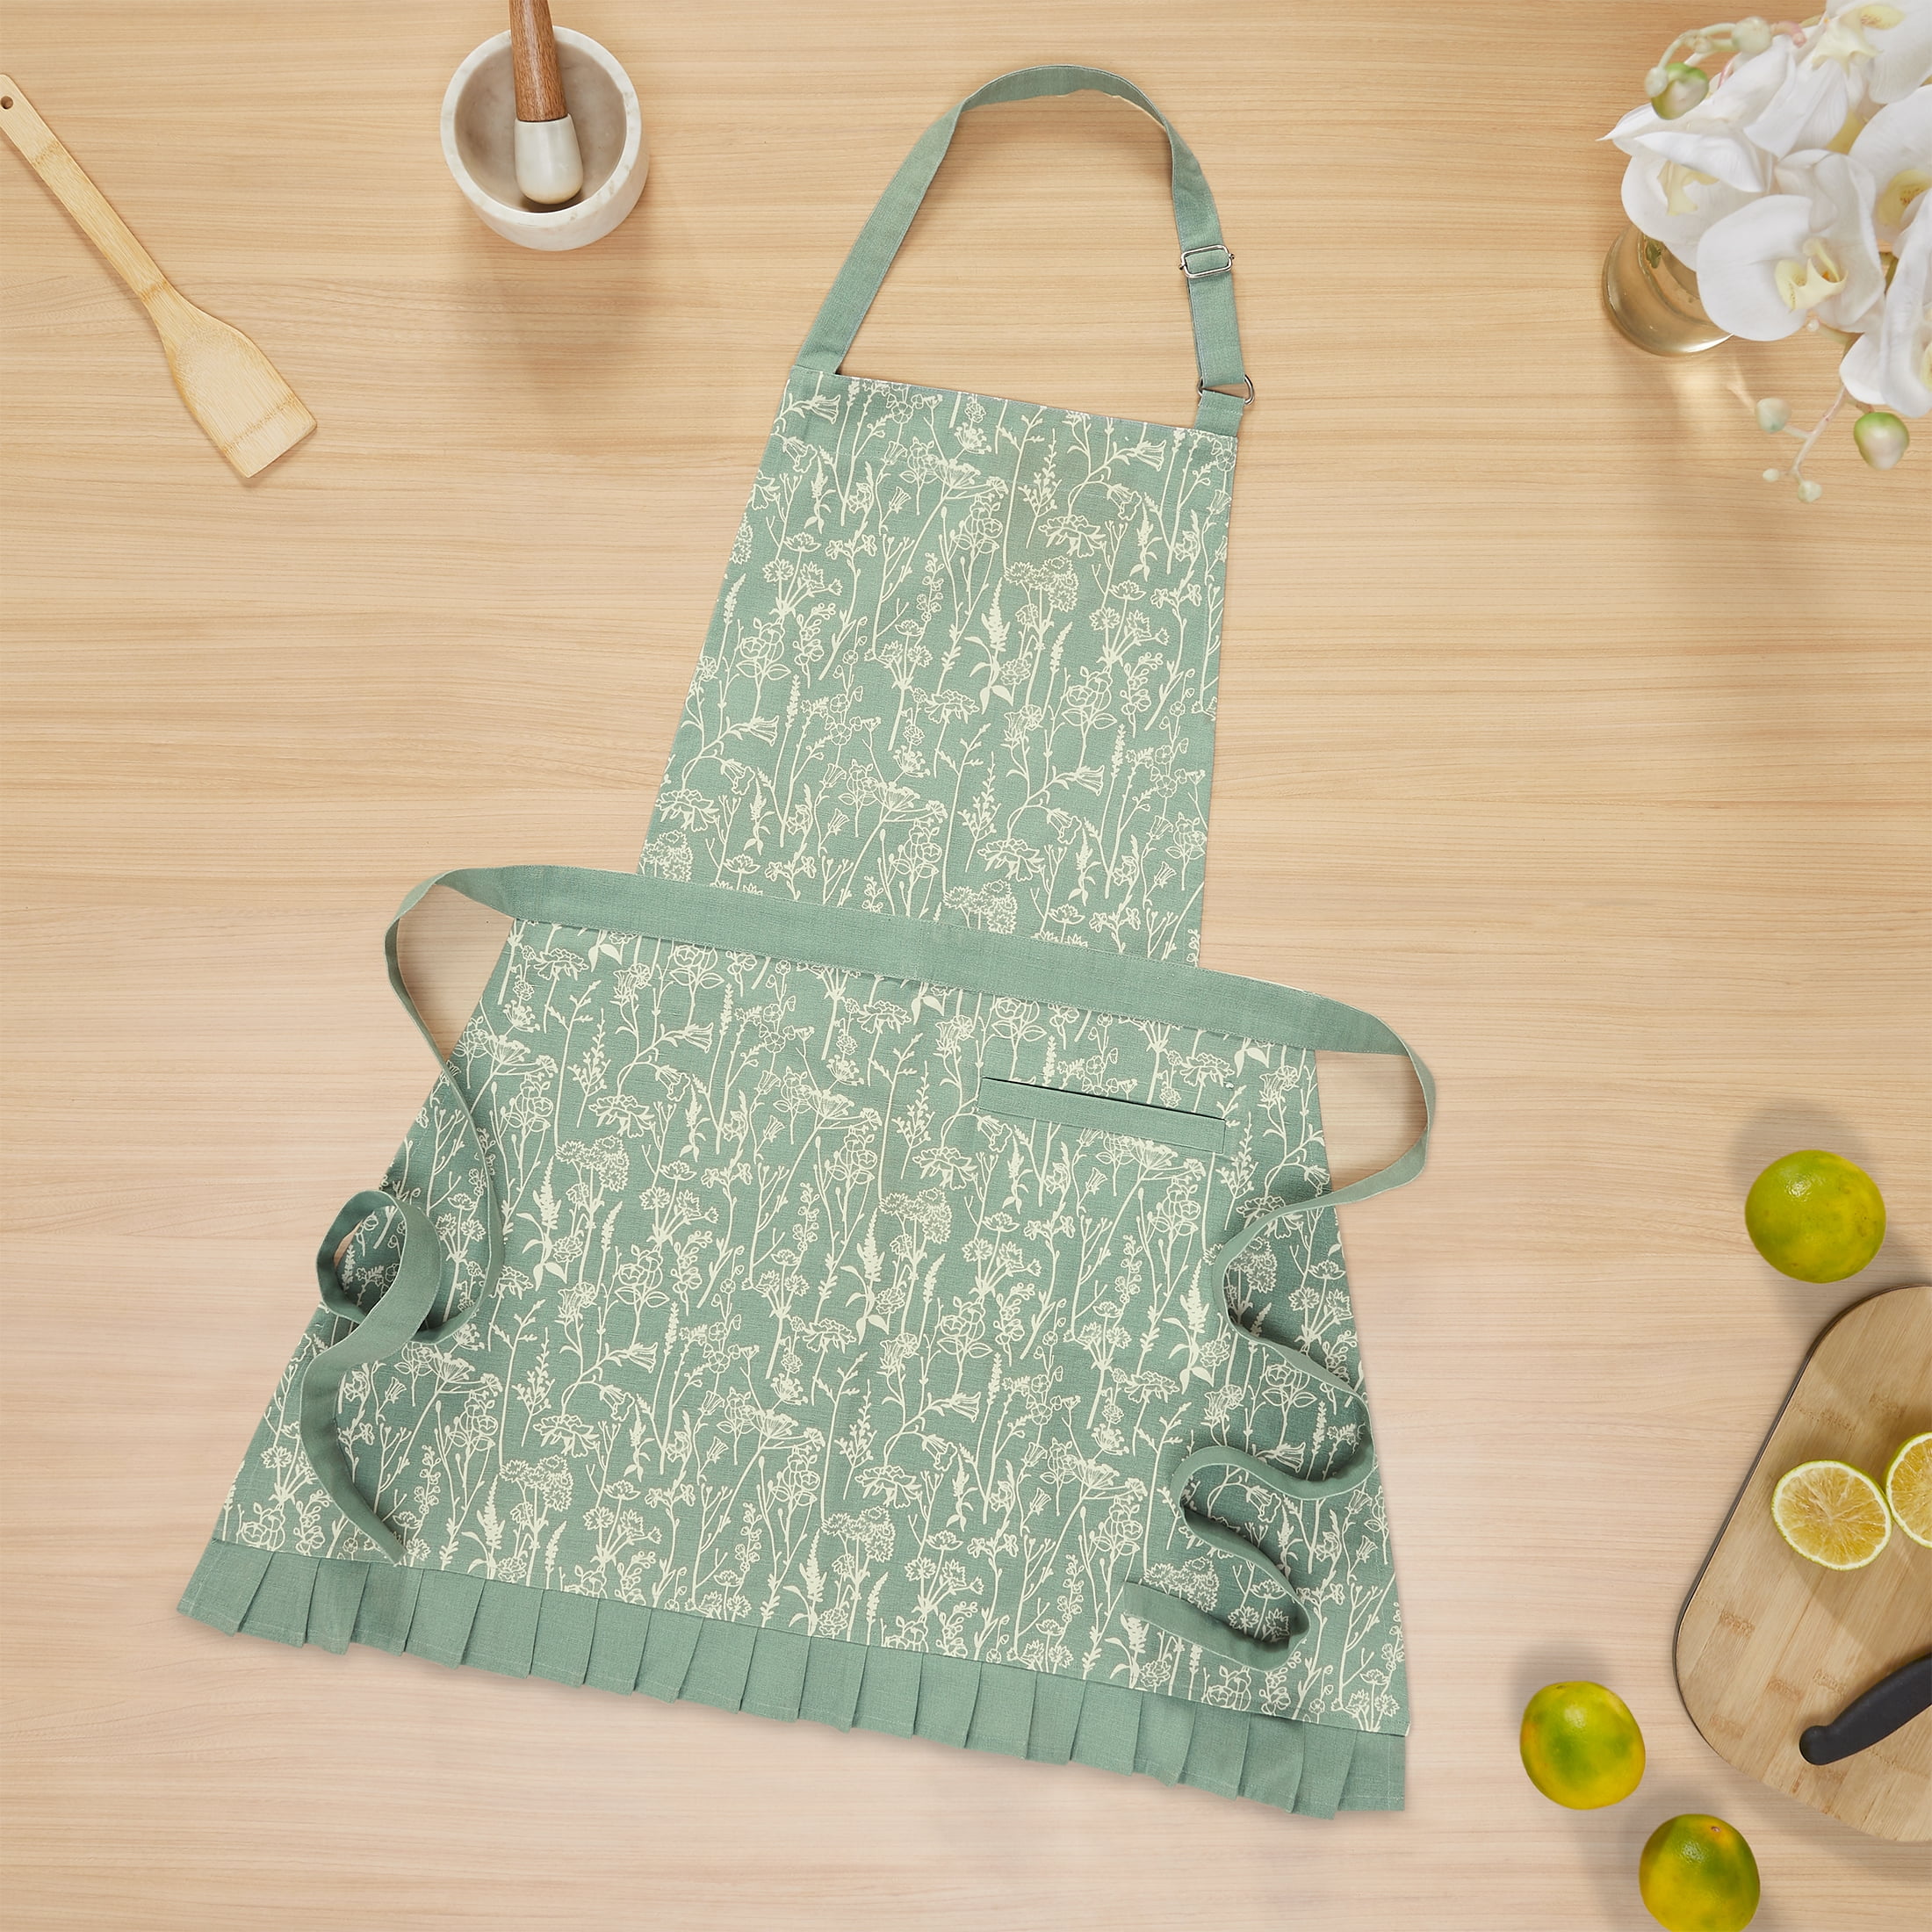 My Texas House Polyester/Cotton 30" x 54" Floral Ruffle Apron, Green